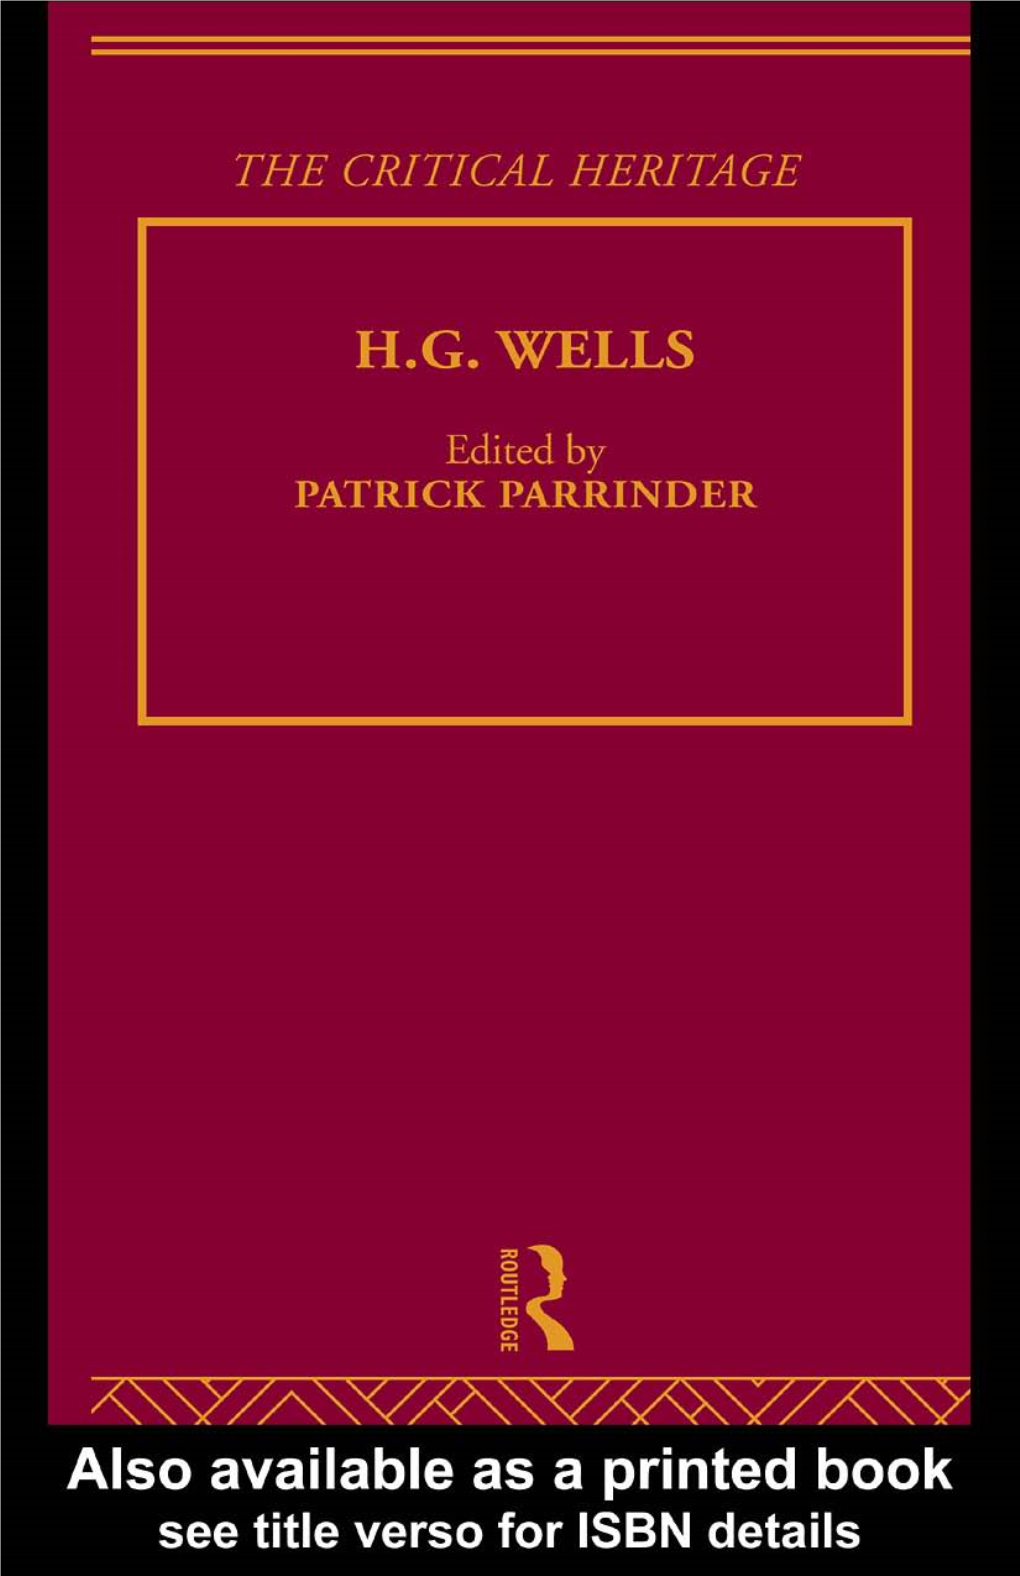 H.G.Wells: the Critical Heritage